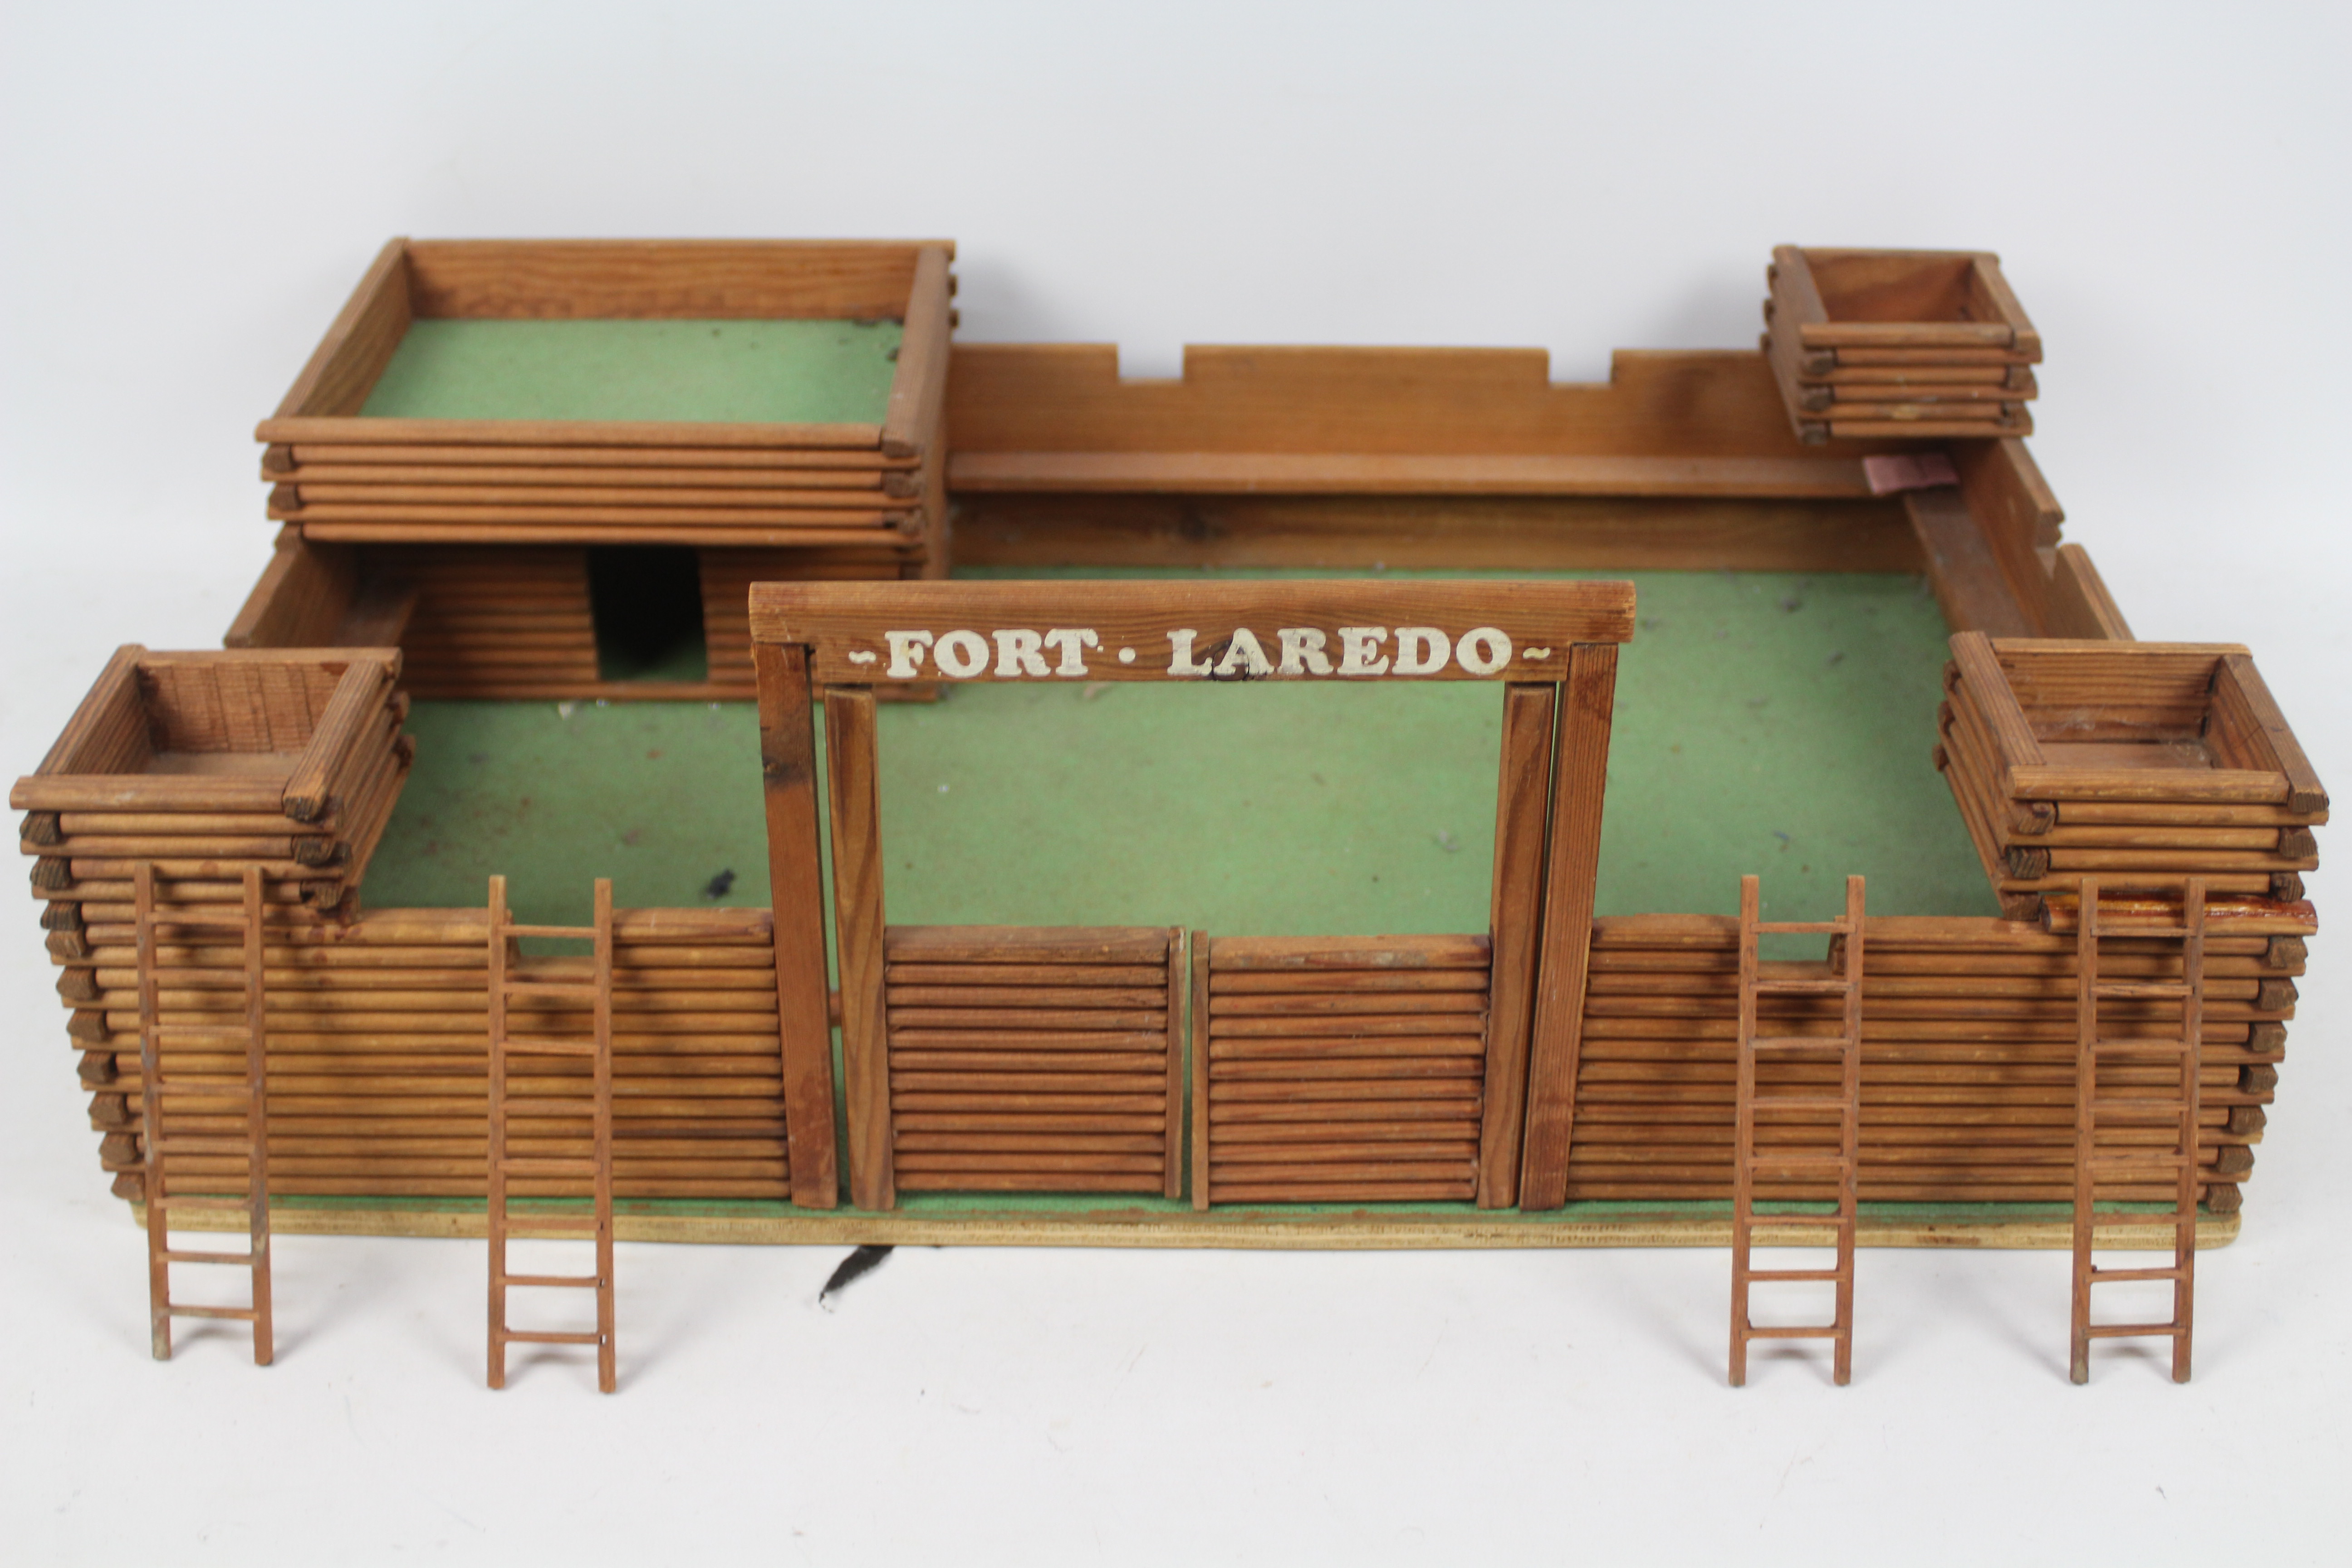 Hanse (Denmark) - A vintage unboxed wooden toy fort ' Fort Laredo' by the Danish manufacturer Hanse. - Image 4 of 8